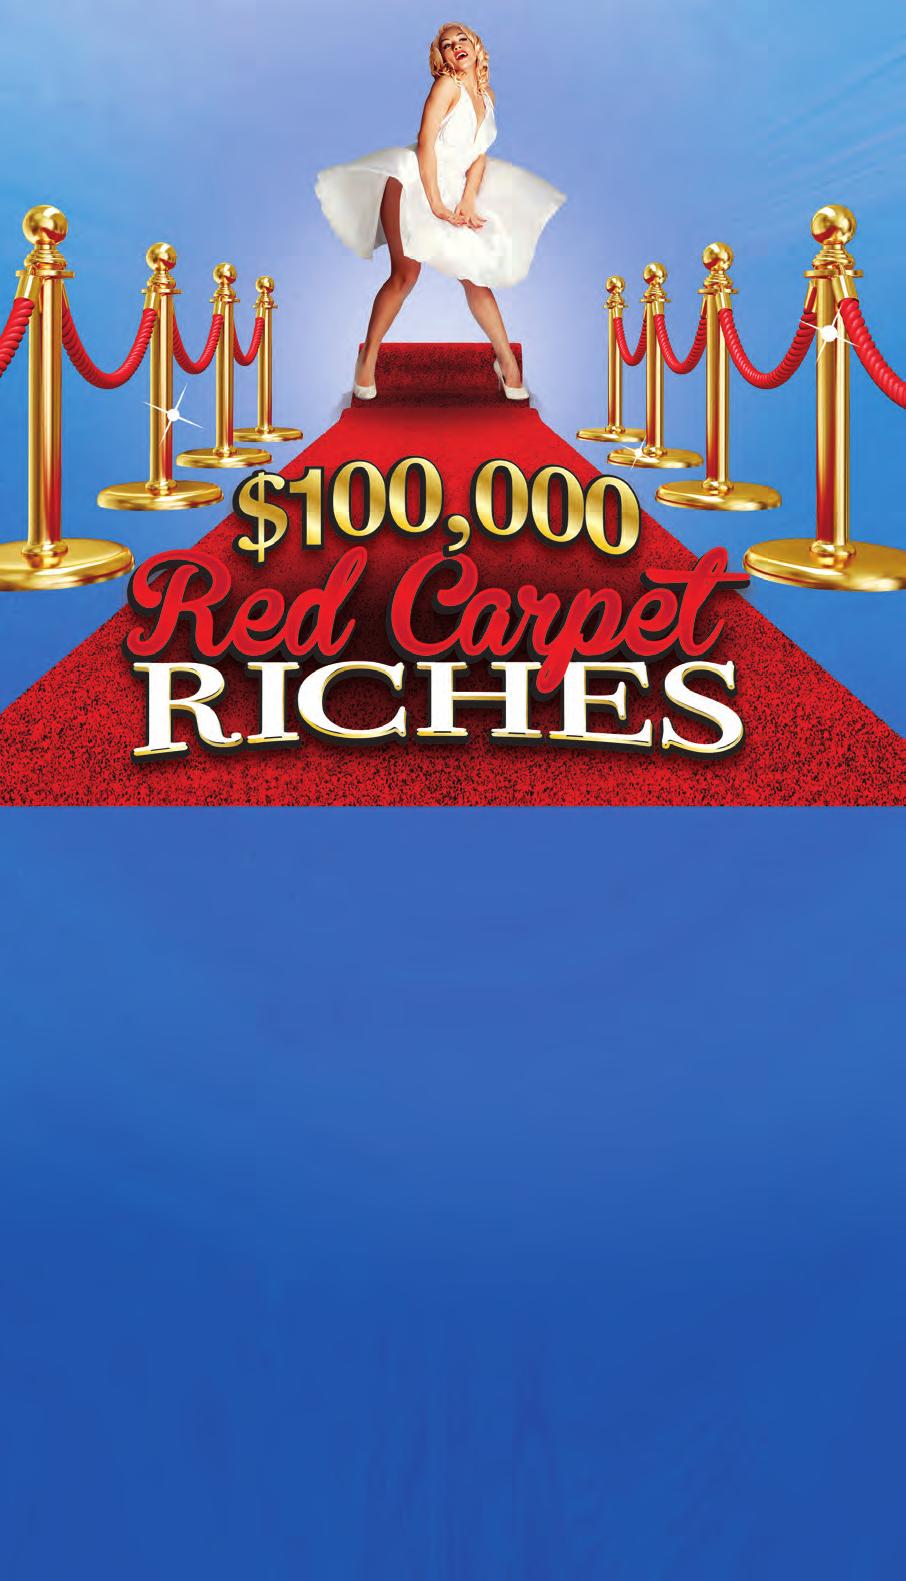 WIN UP TO $100,000 CASH!